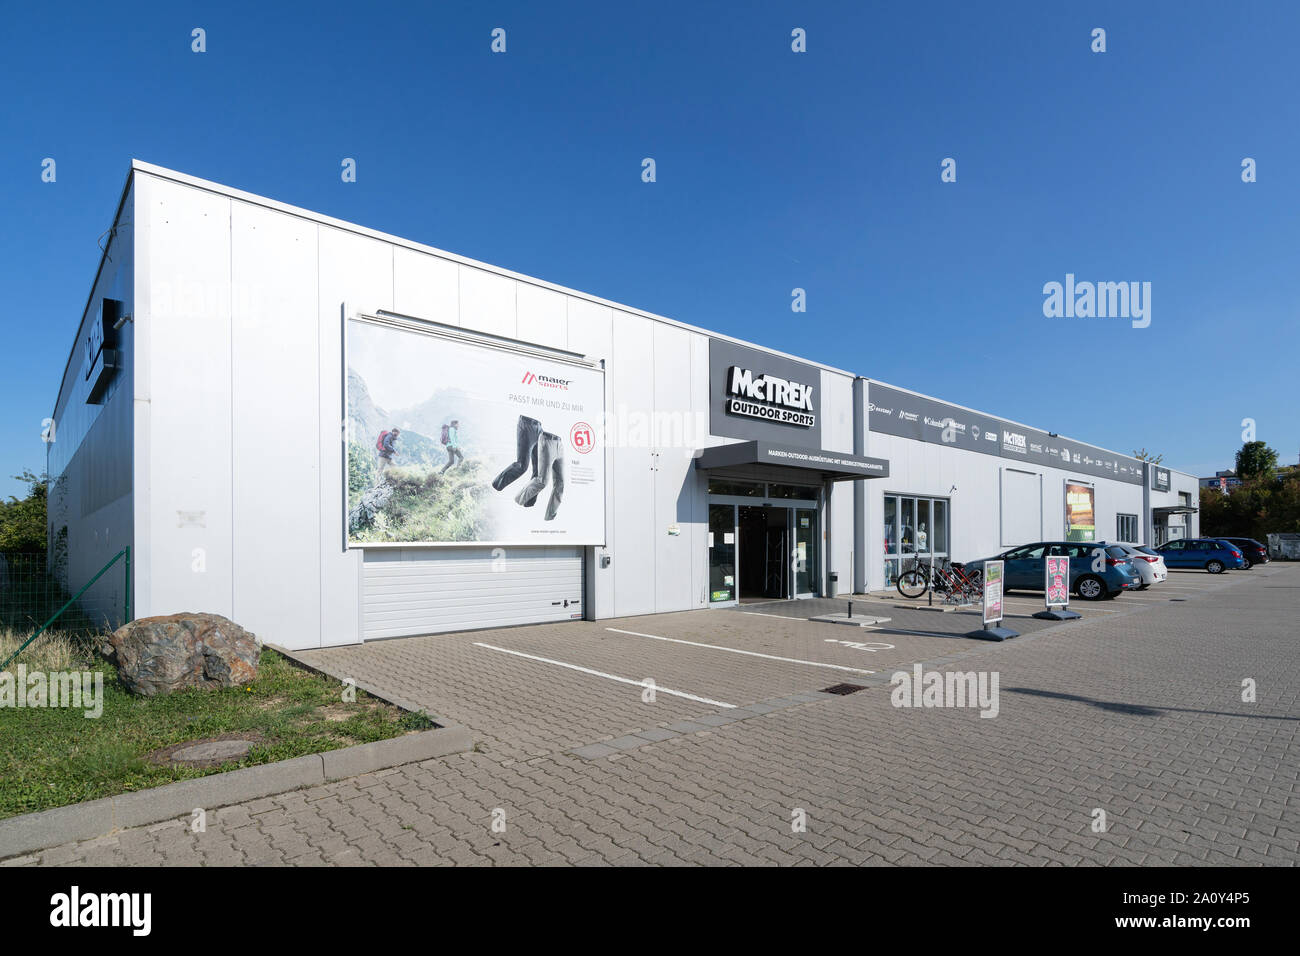 Outdoor Sports Store High Resolution Stock Photography and Images - Alamy